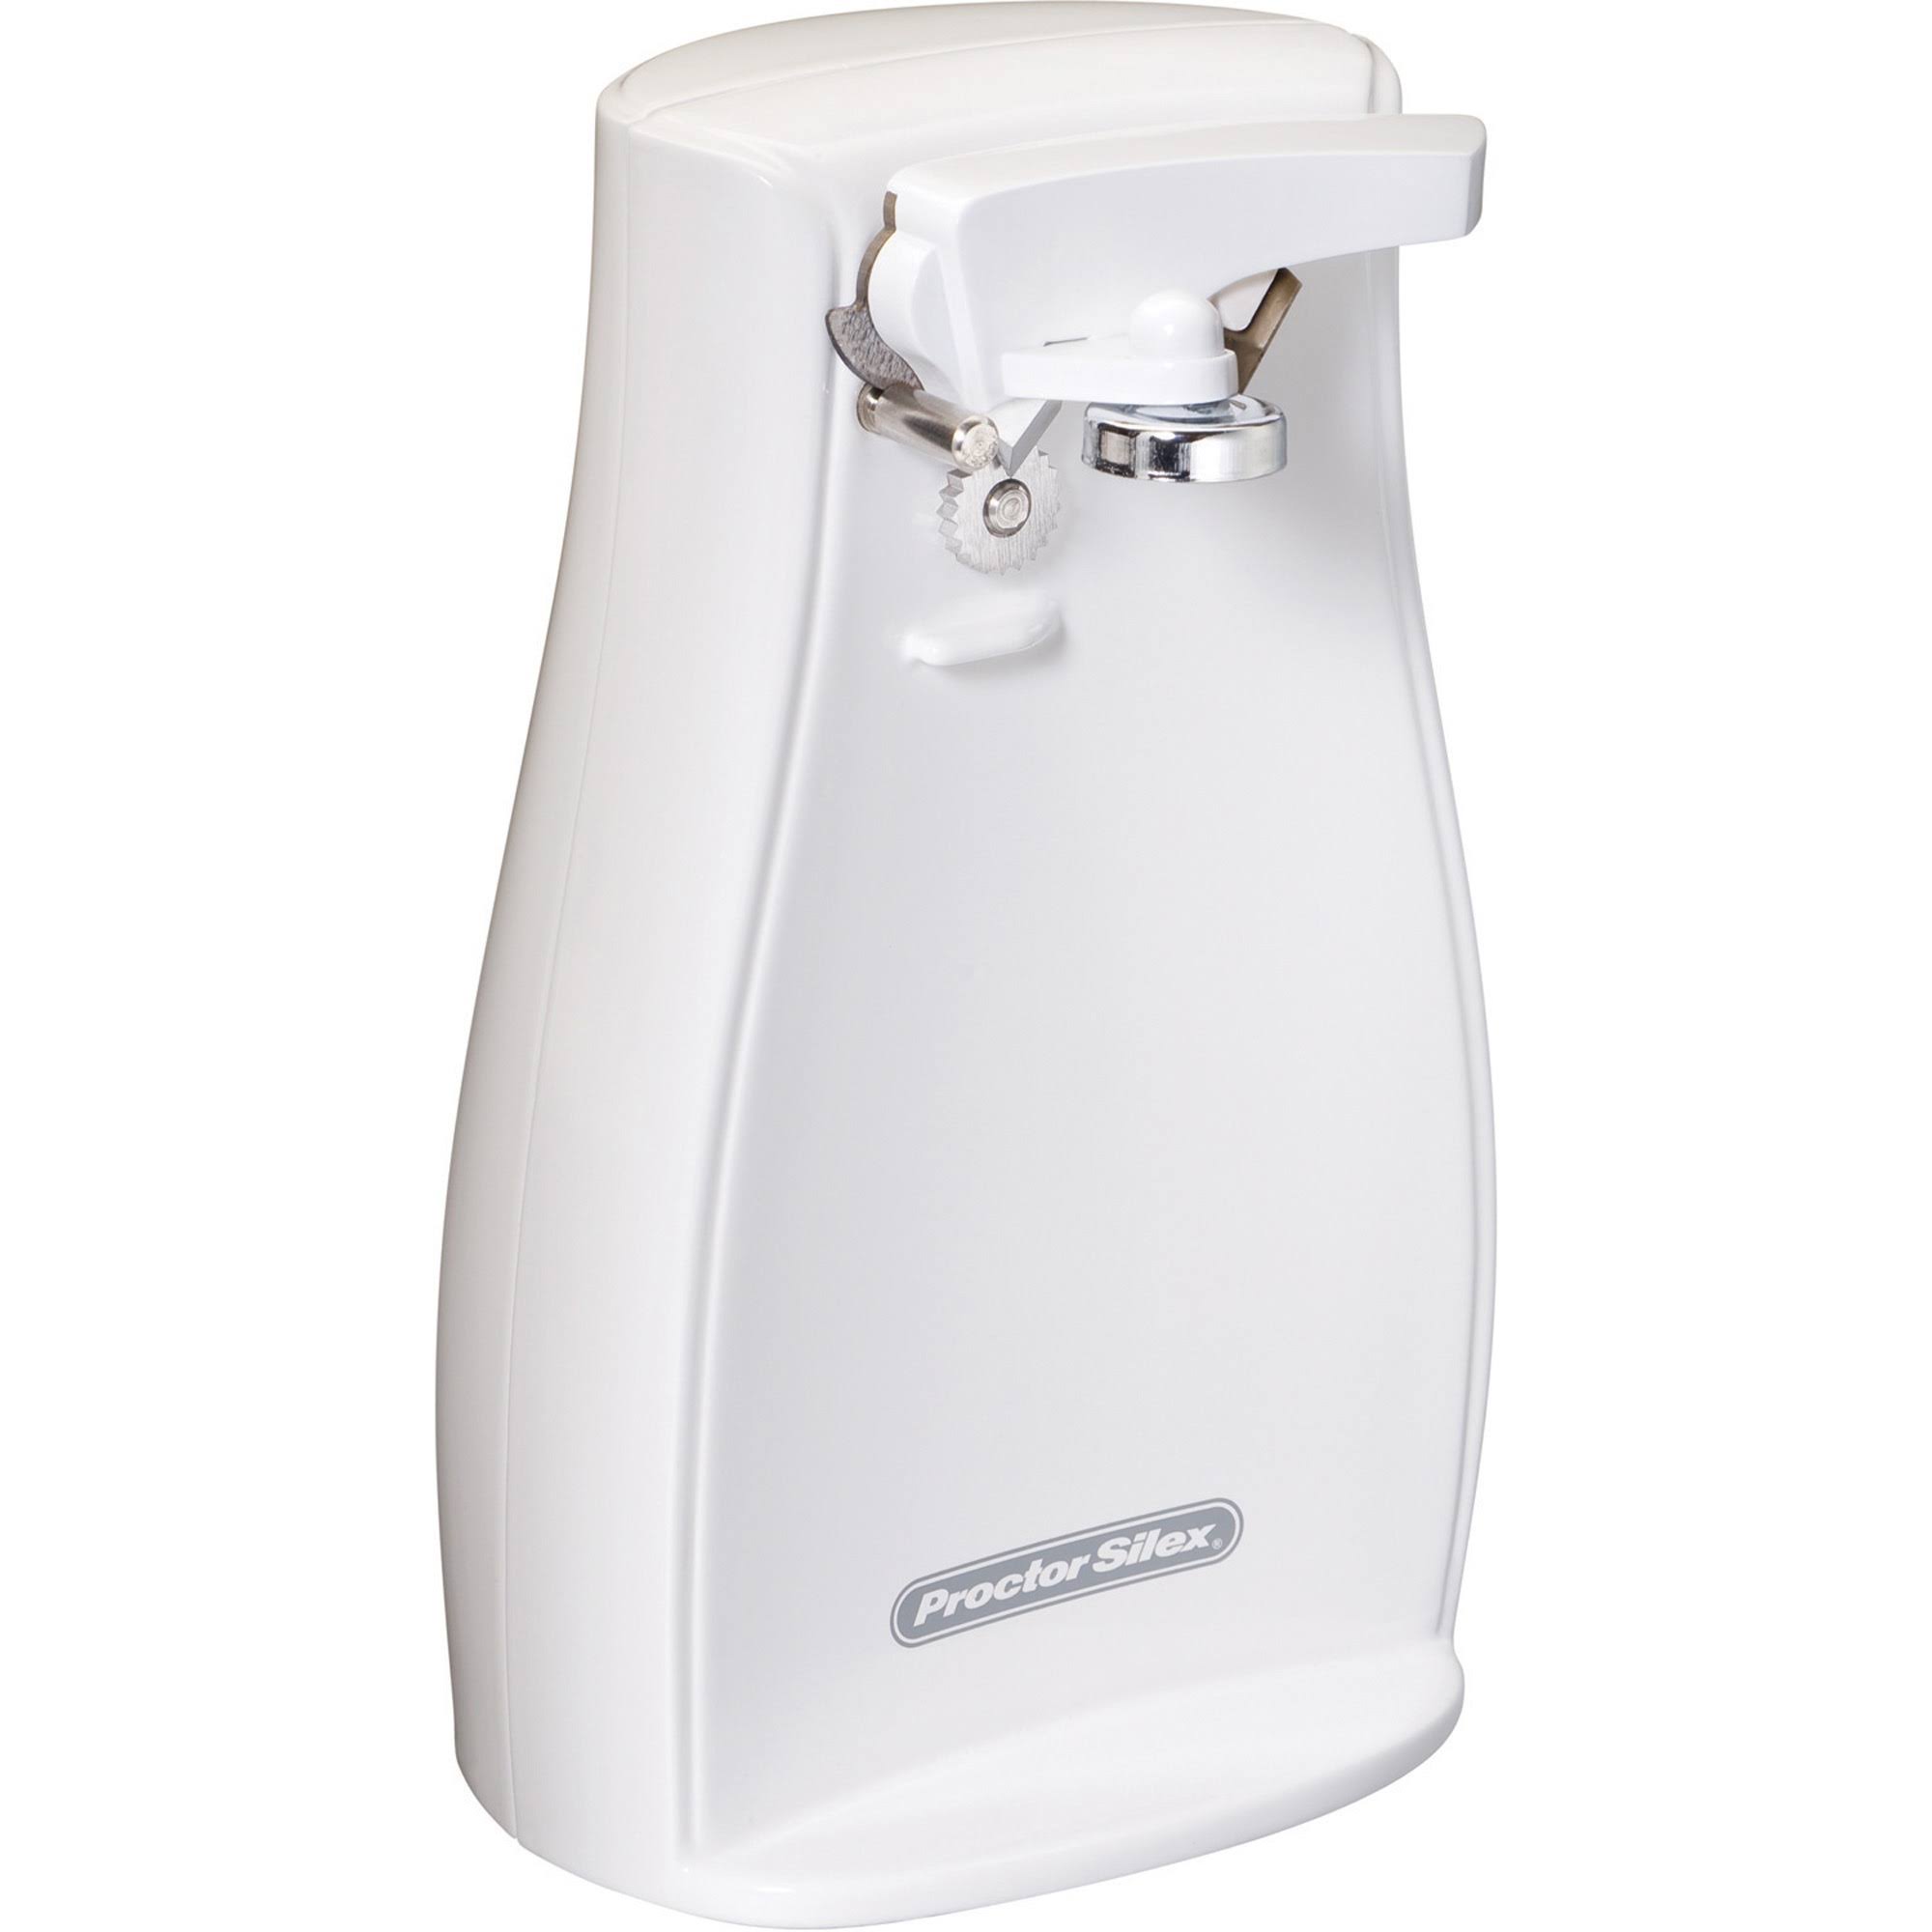 Proctor Silex 75224F Power Can Opener - White